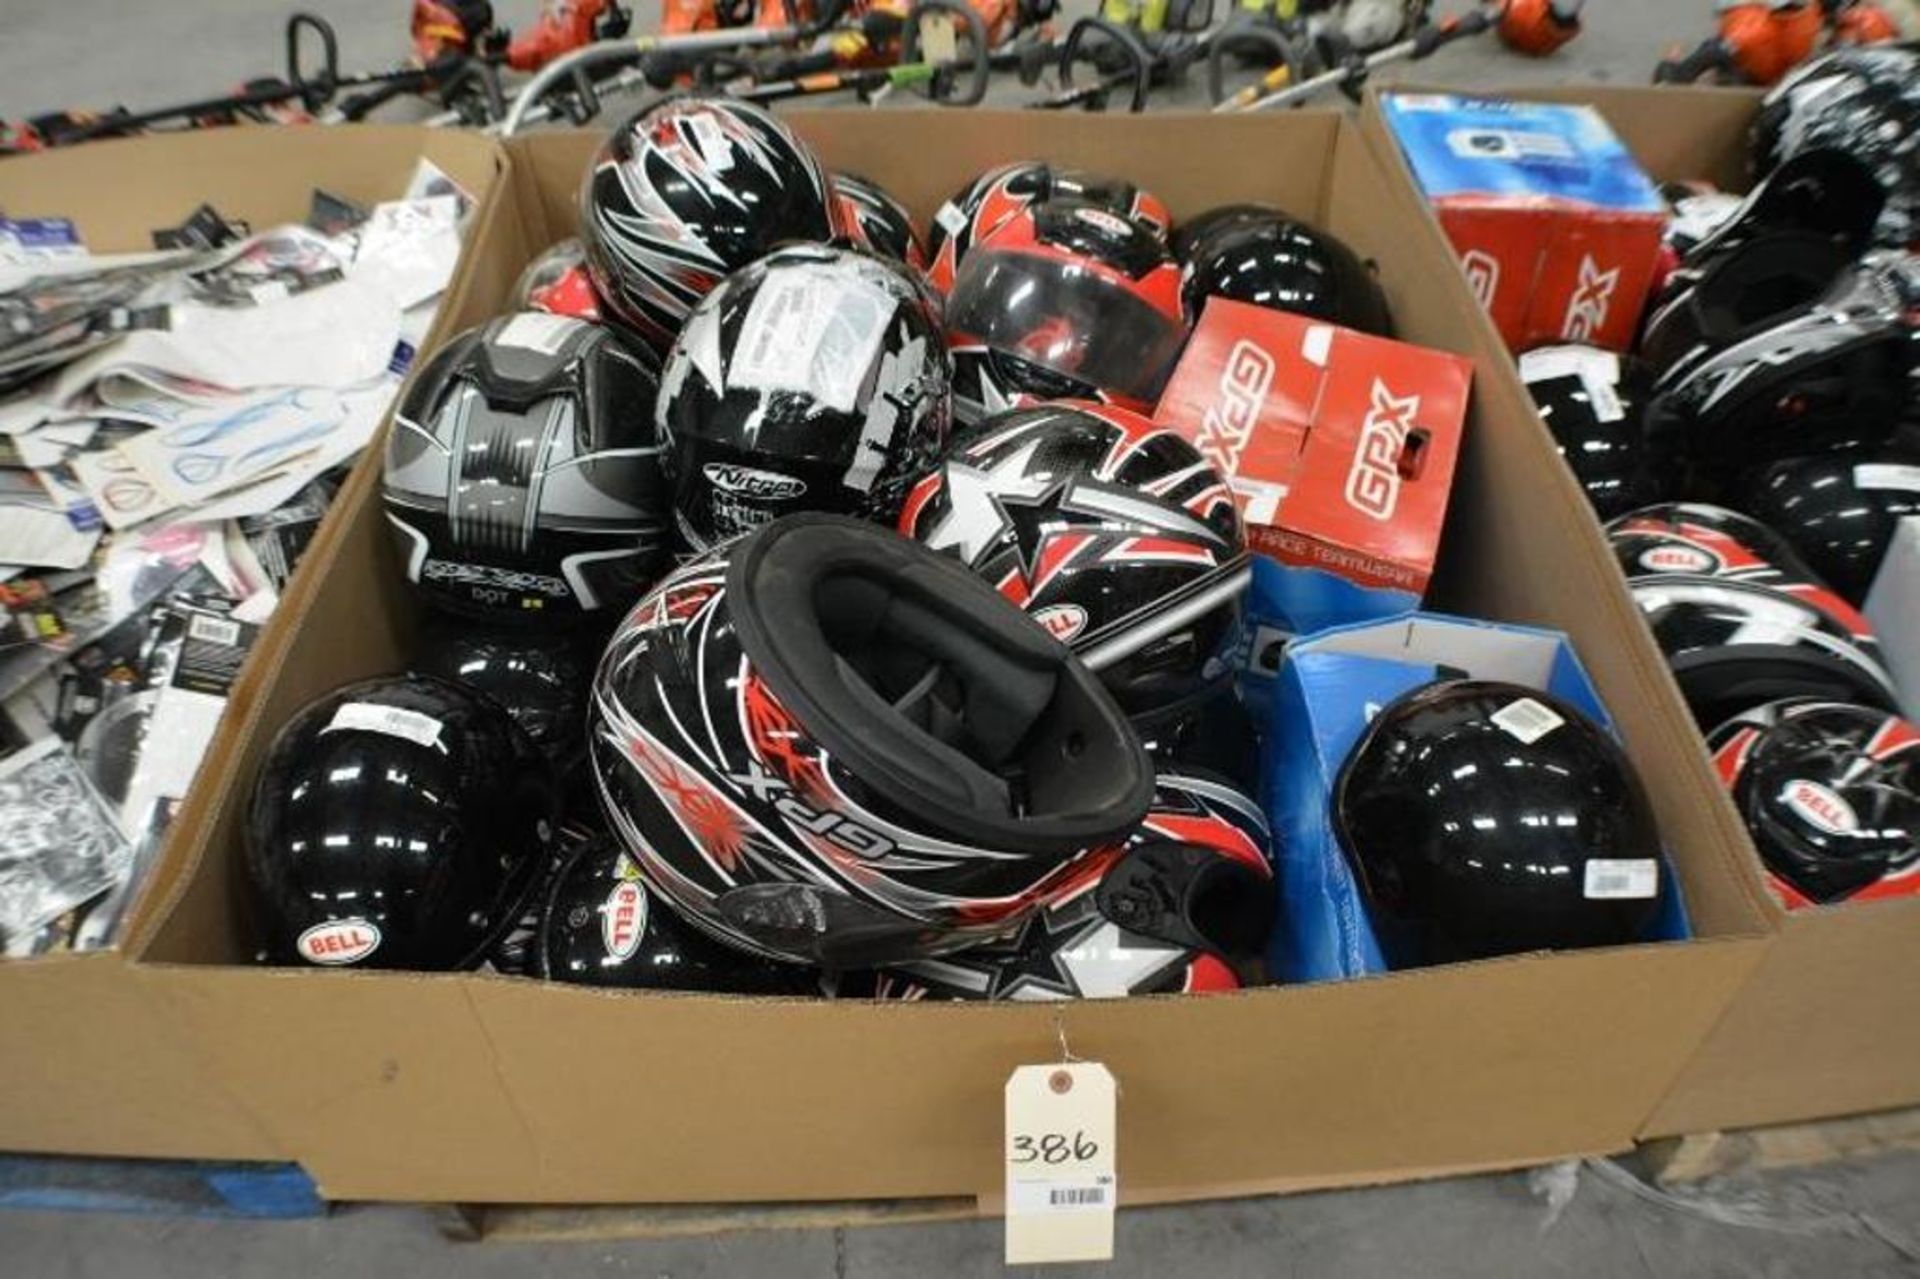 Motorcycle Helmets. Assorted Sizes by GPX and Bell. Contents of Gaylord